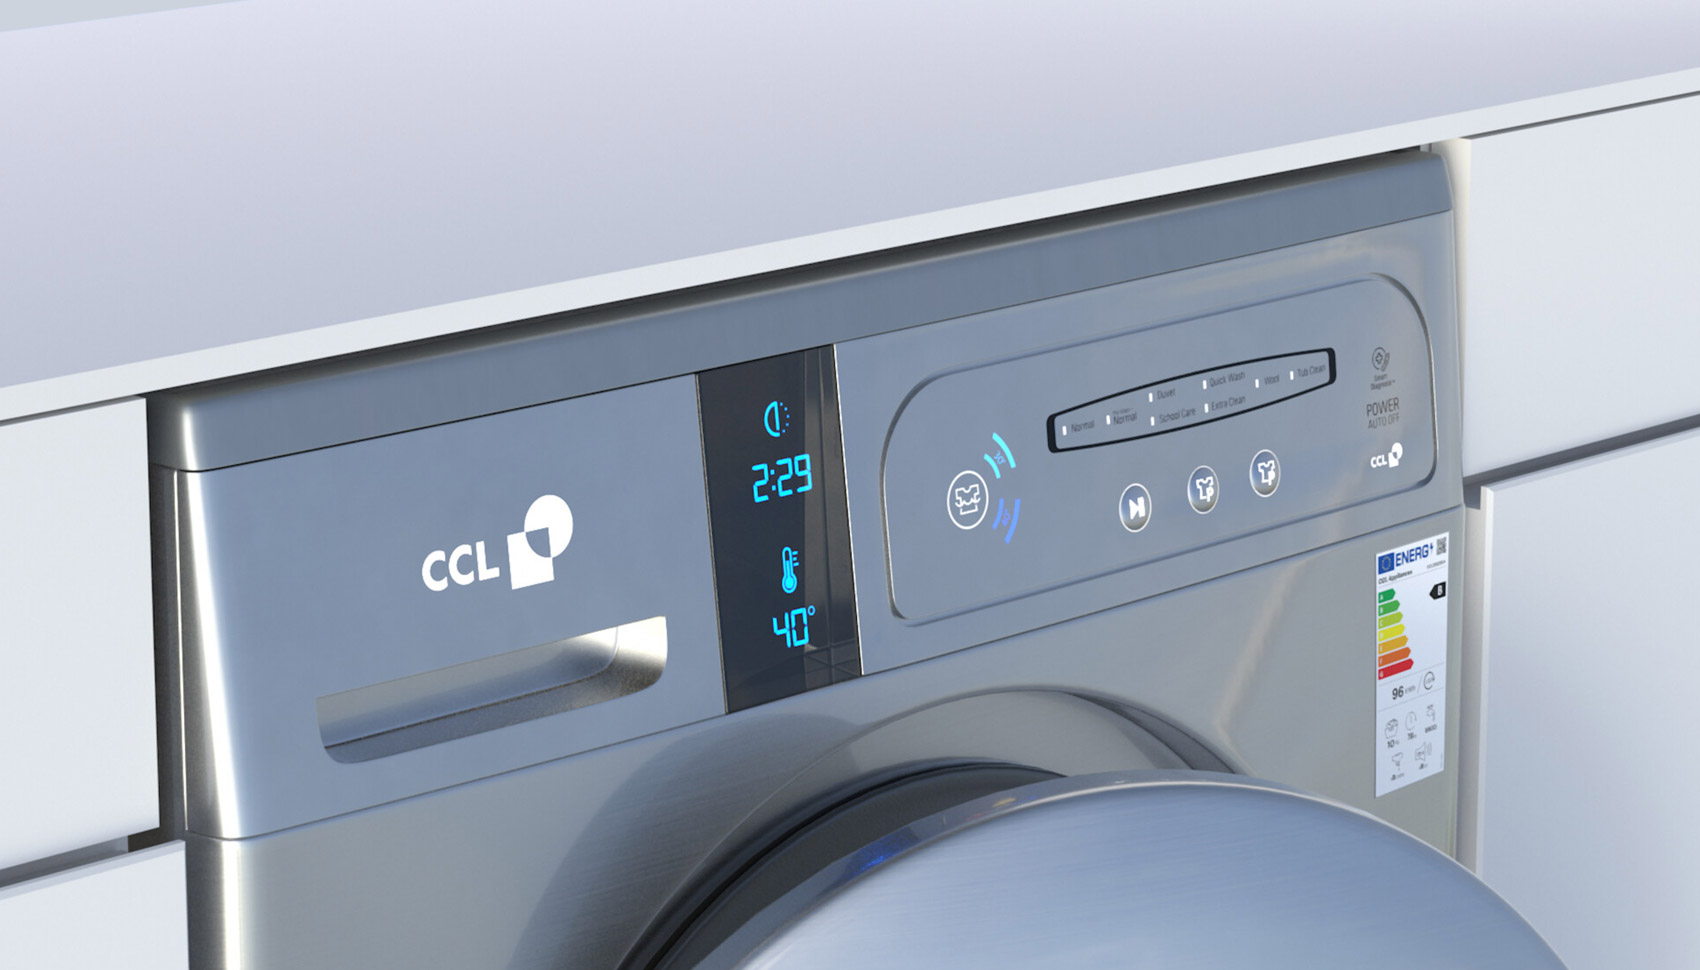 CCL Design products, Printed Electronics and HMI Interfaces, Connected home, Washing machine